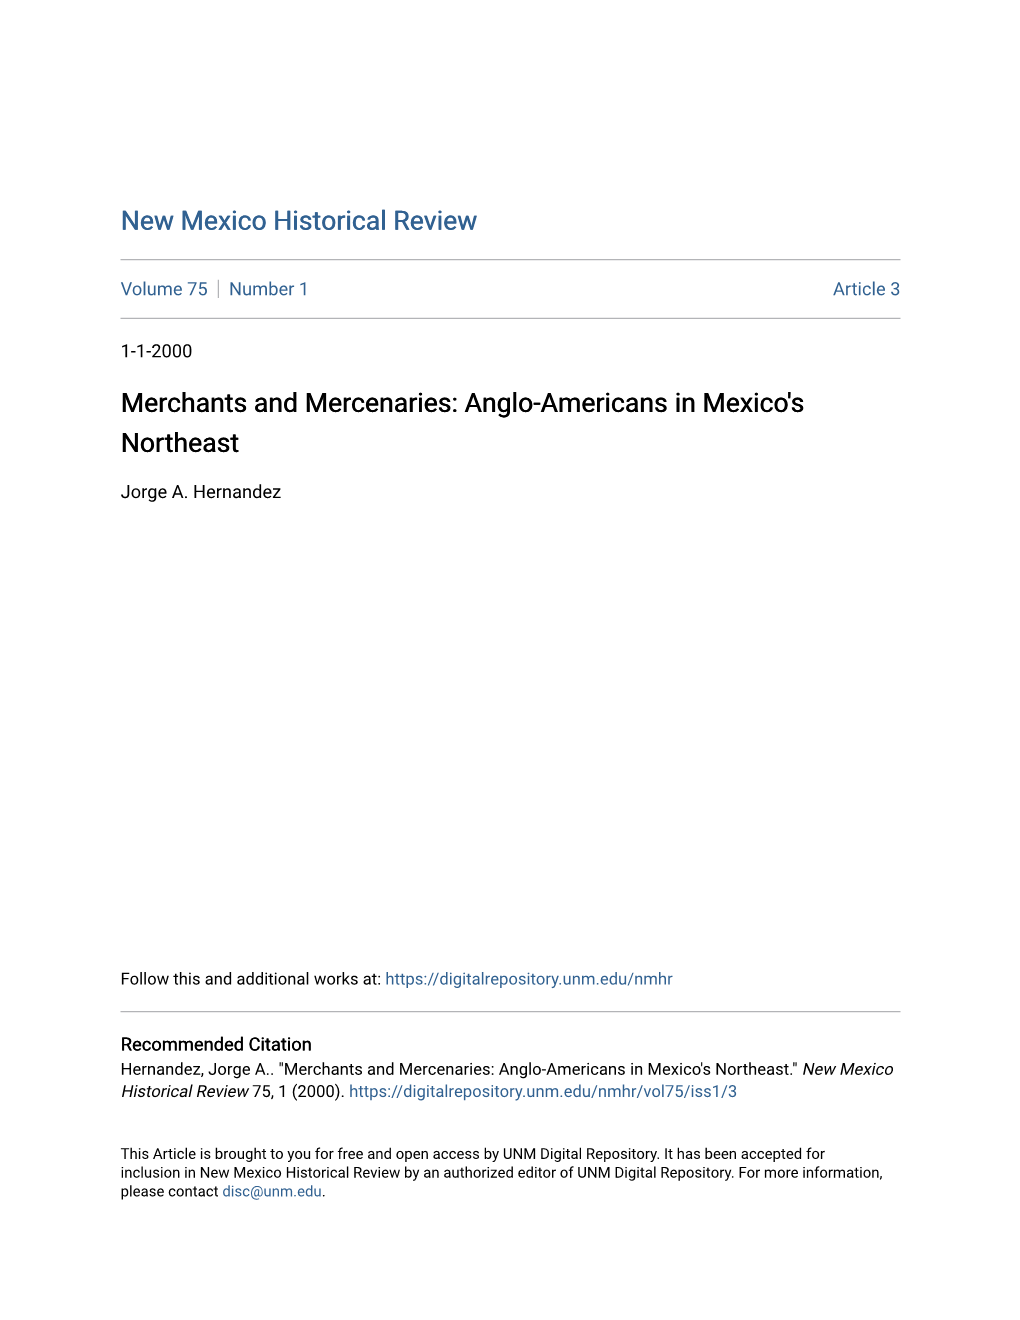 Merchants and Mercenaries: Anglo-Americans in Mexico's Northeast